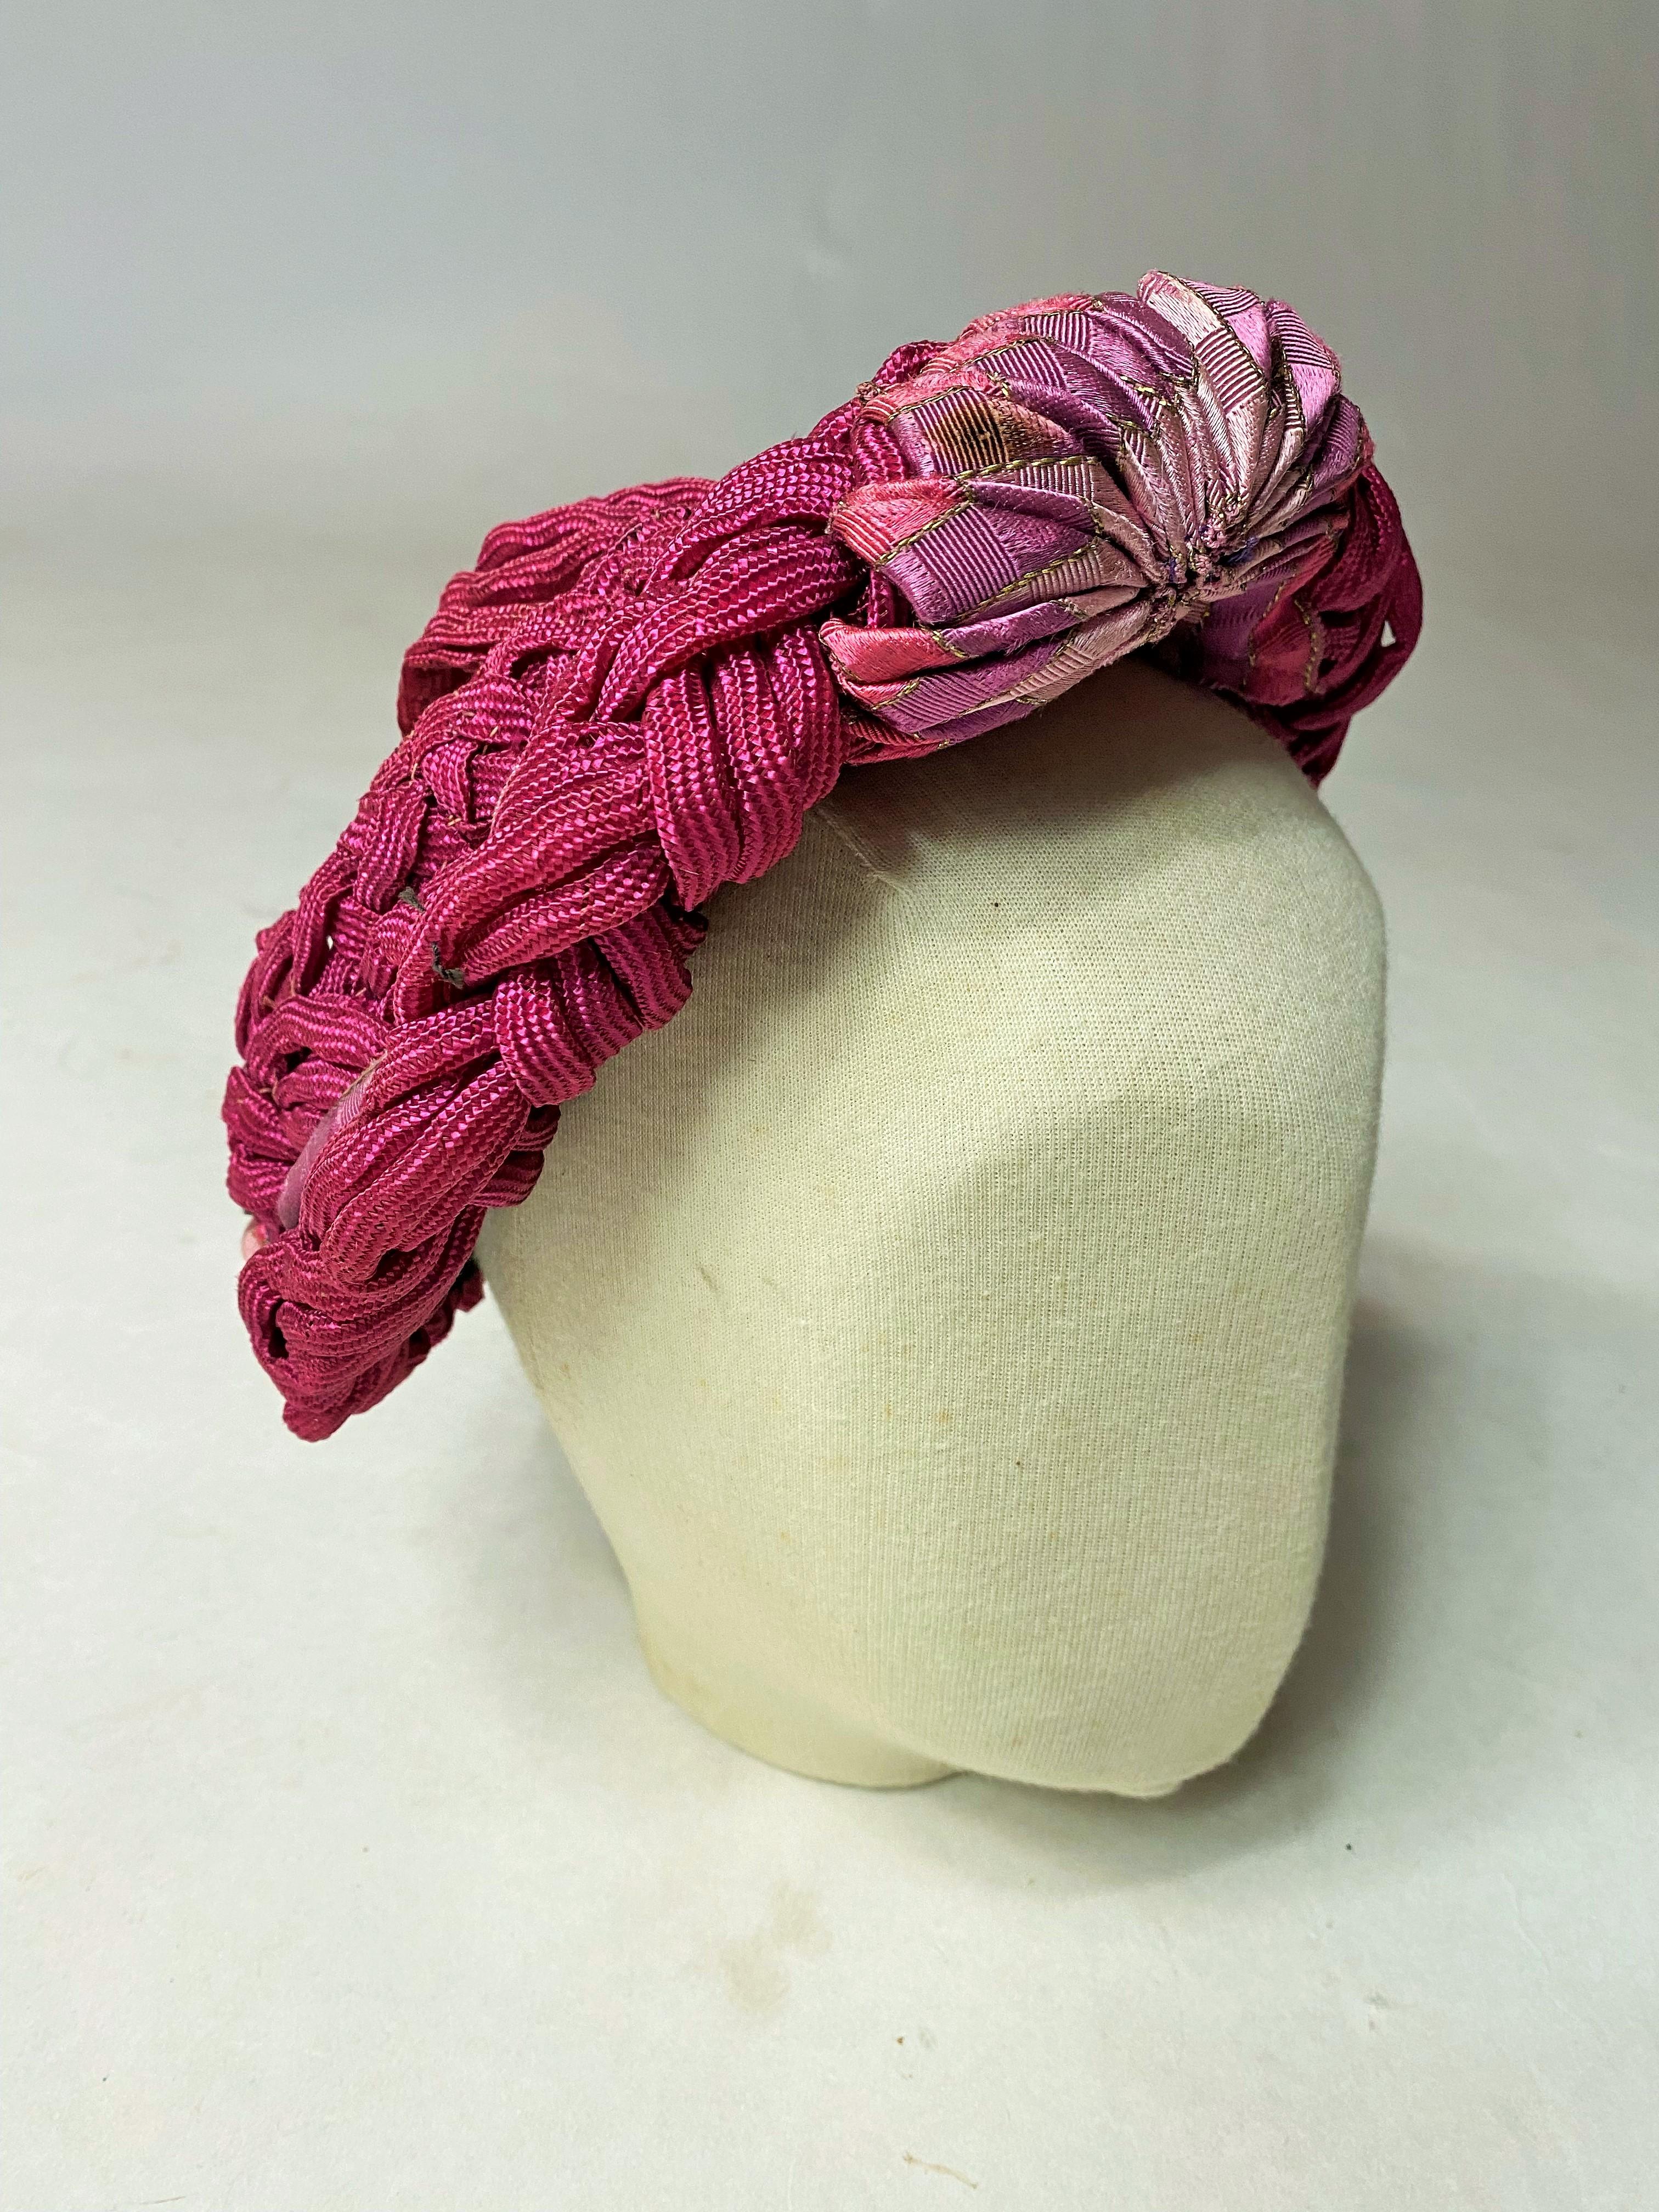 Circa 1940-1945

France

Amazing lady's bibi made of cylindrical ribbon braids in Rafia and pink-parma Celluloid. Work done during the material shortage and made from recycled and recovered elements, from a seamstress probably at home! Matching